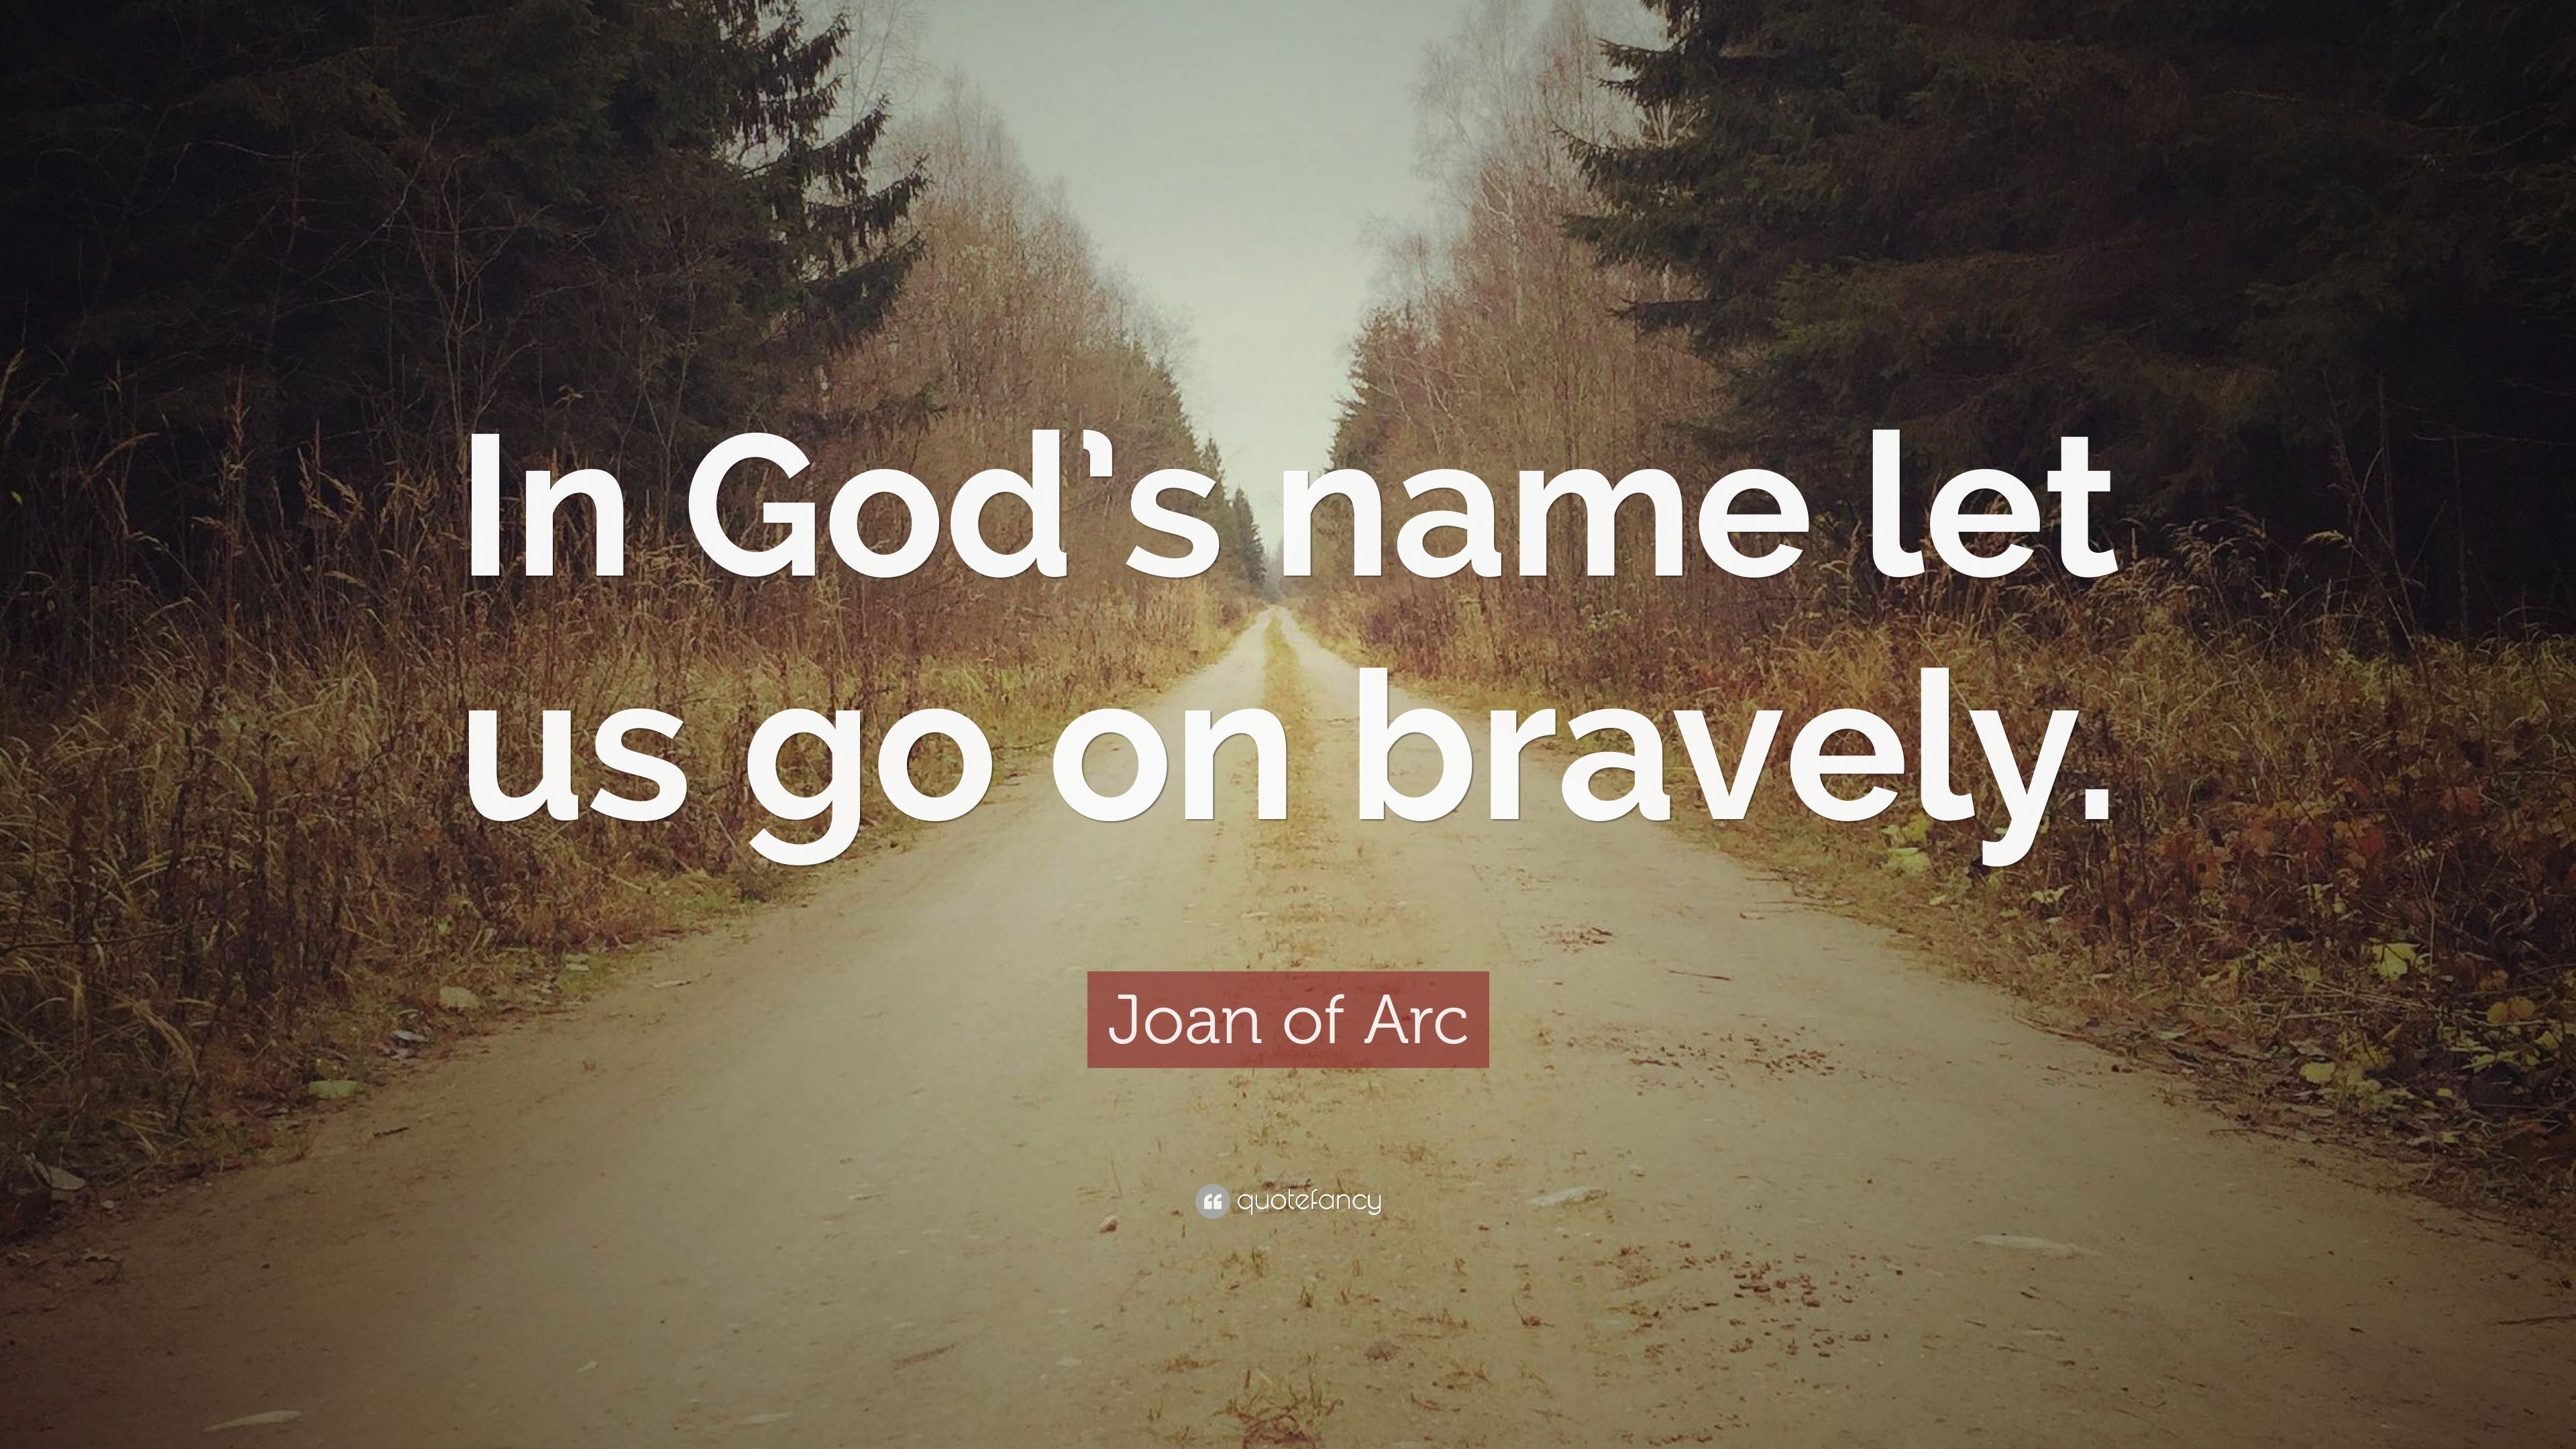 Joan of Arc Quote: “In God's name let us go on bravely.” (7 wallpaper)